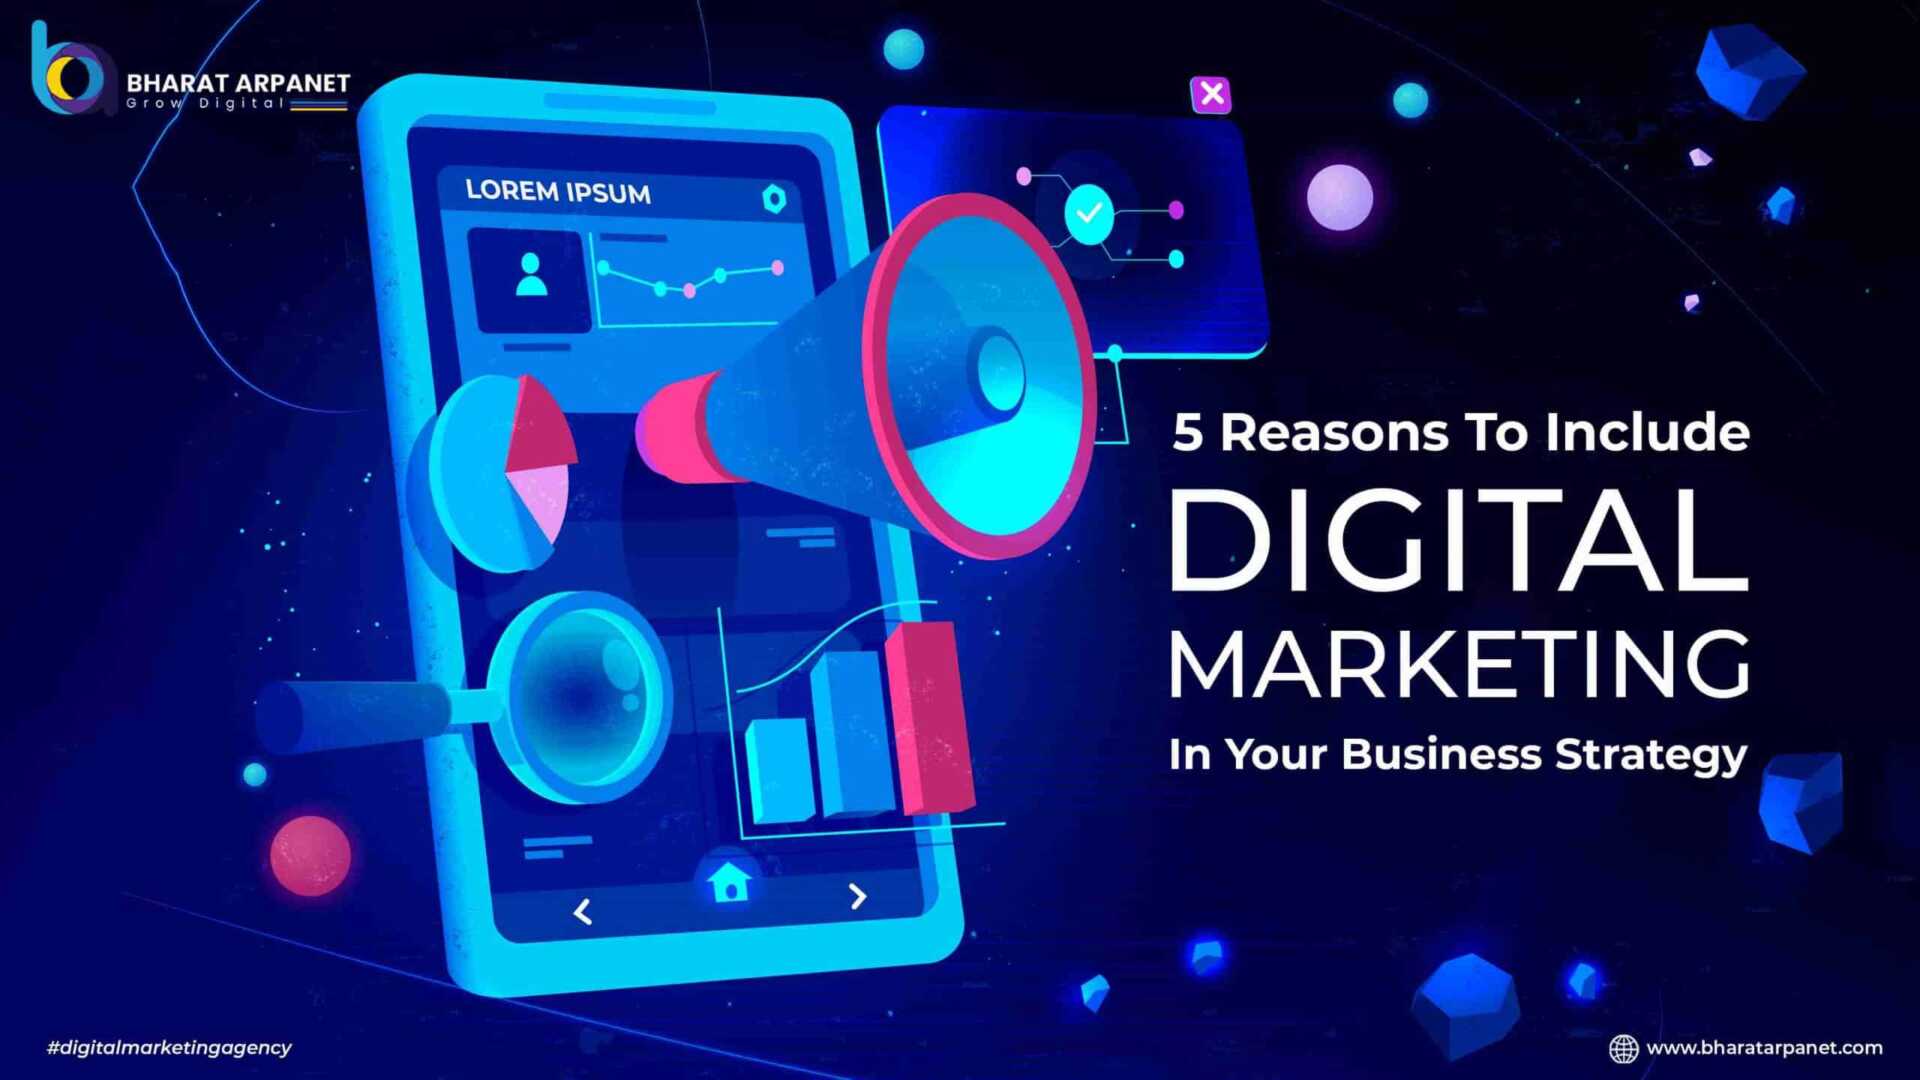 5 Reasons To Include Digital Marketing In Your Business Strategy